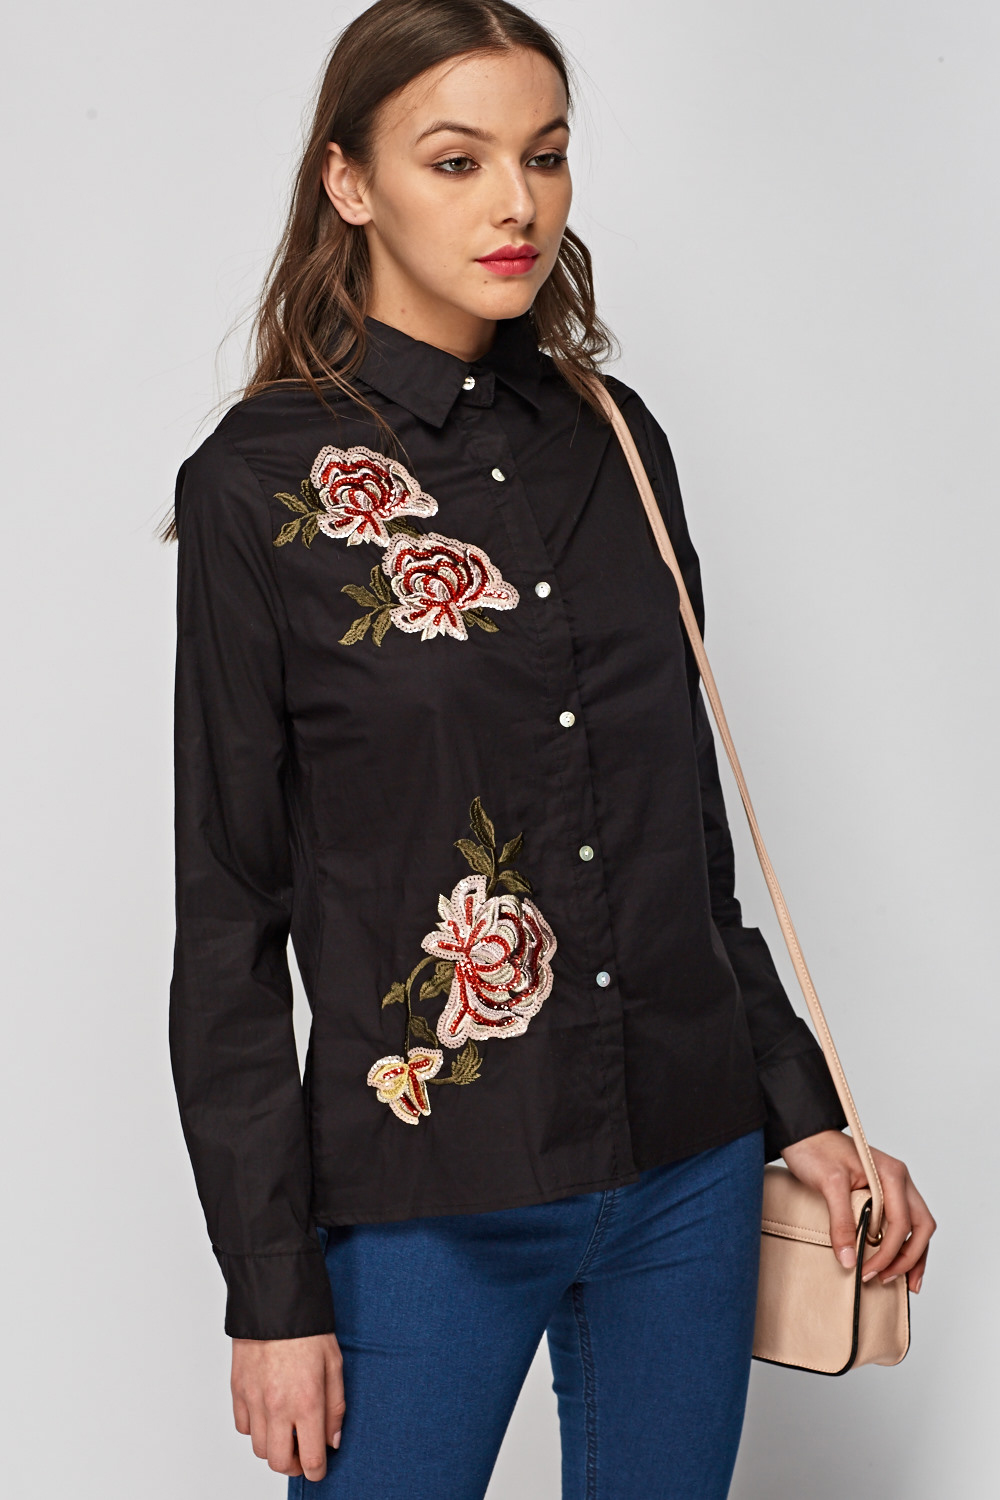 Embroidered Flower Shirt - Just $3